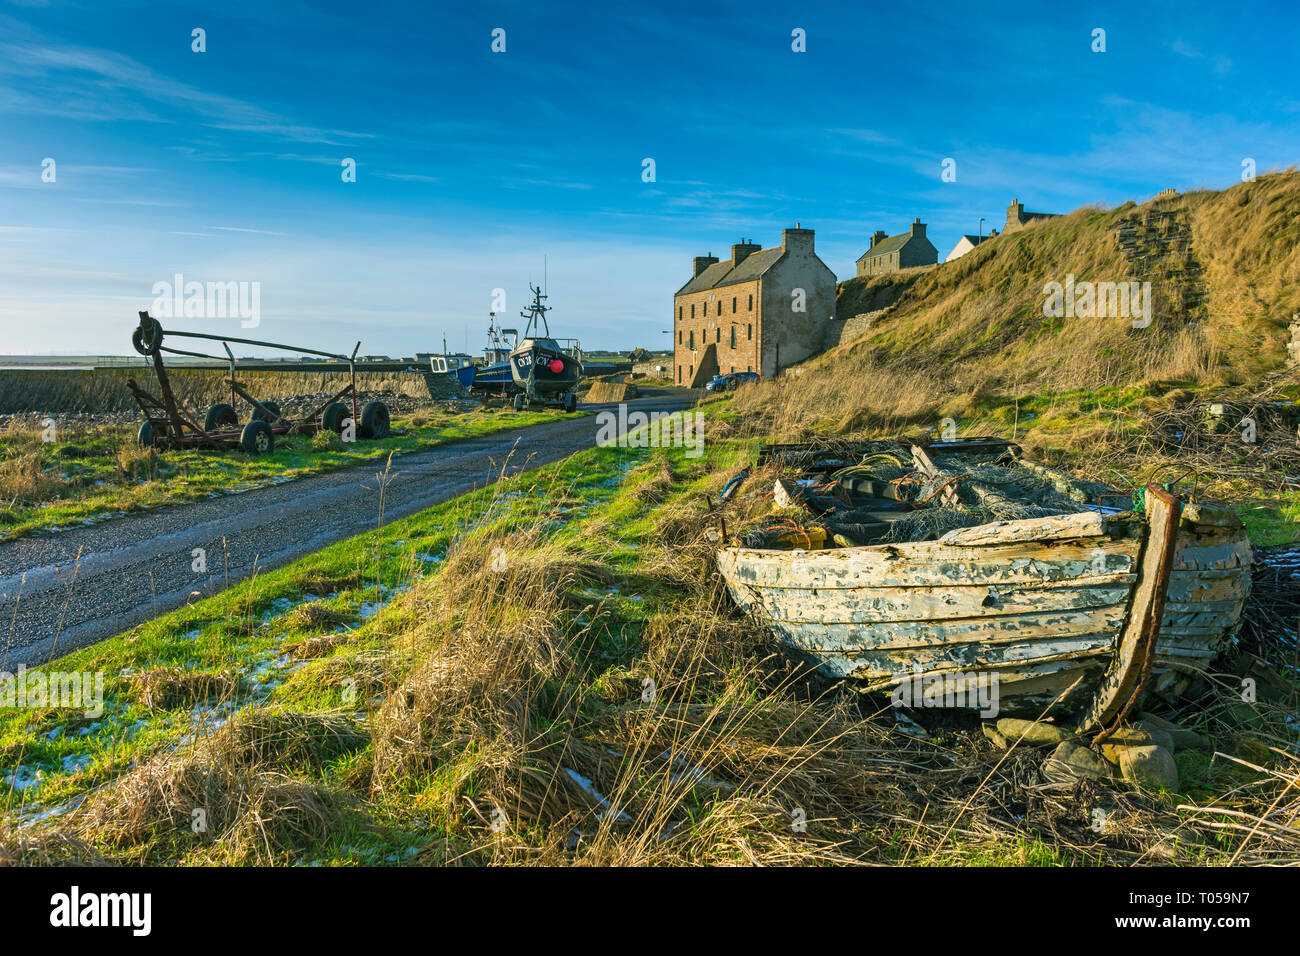 The Harbour House at Keiss, harbour.  Built c1831, formerly a fishing warehouse, now converted to a holiday home.  Keiss, Caithness, Scotland, UK Stock Photo